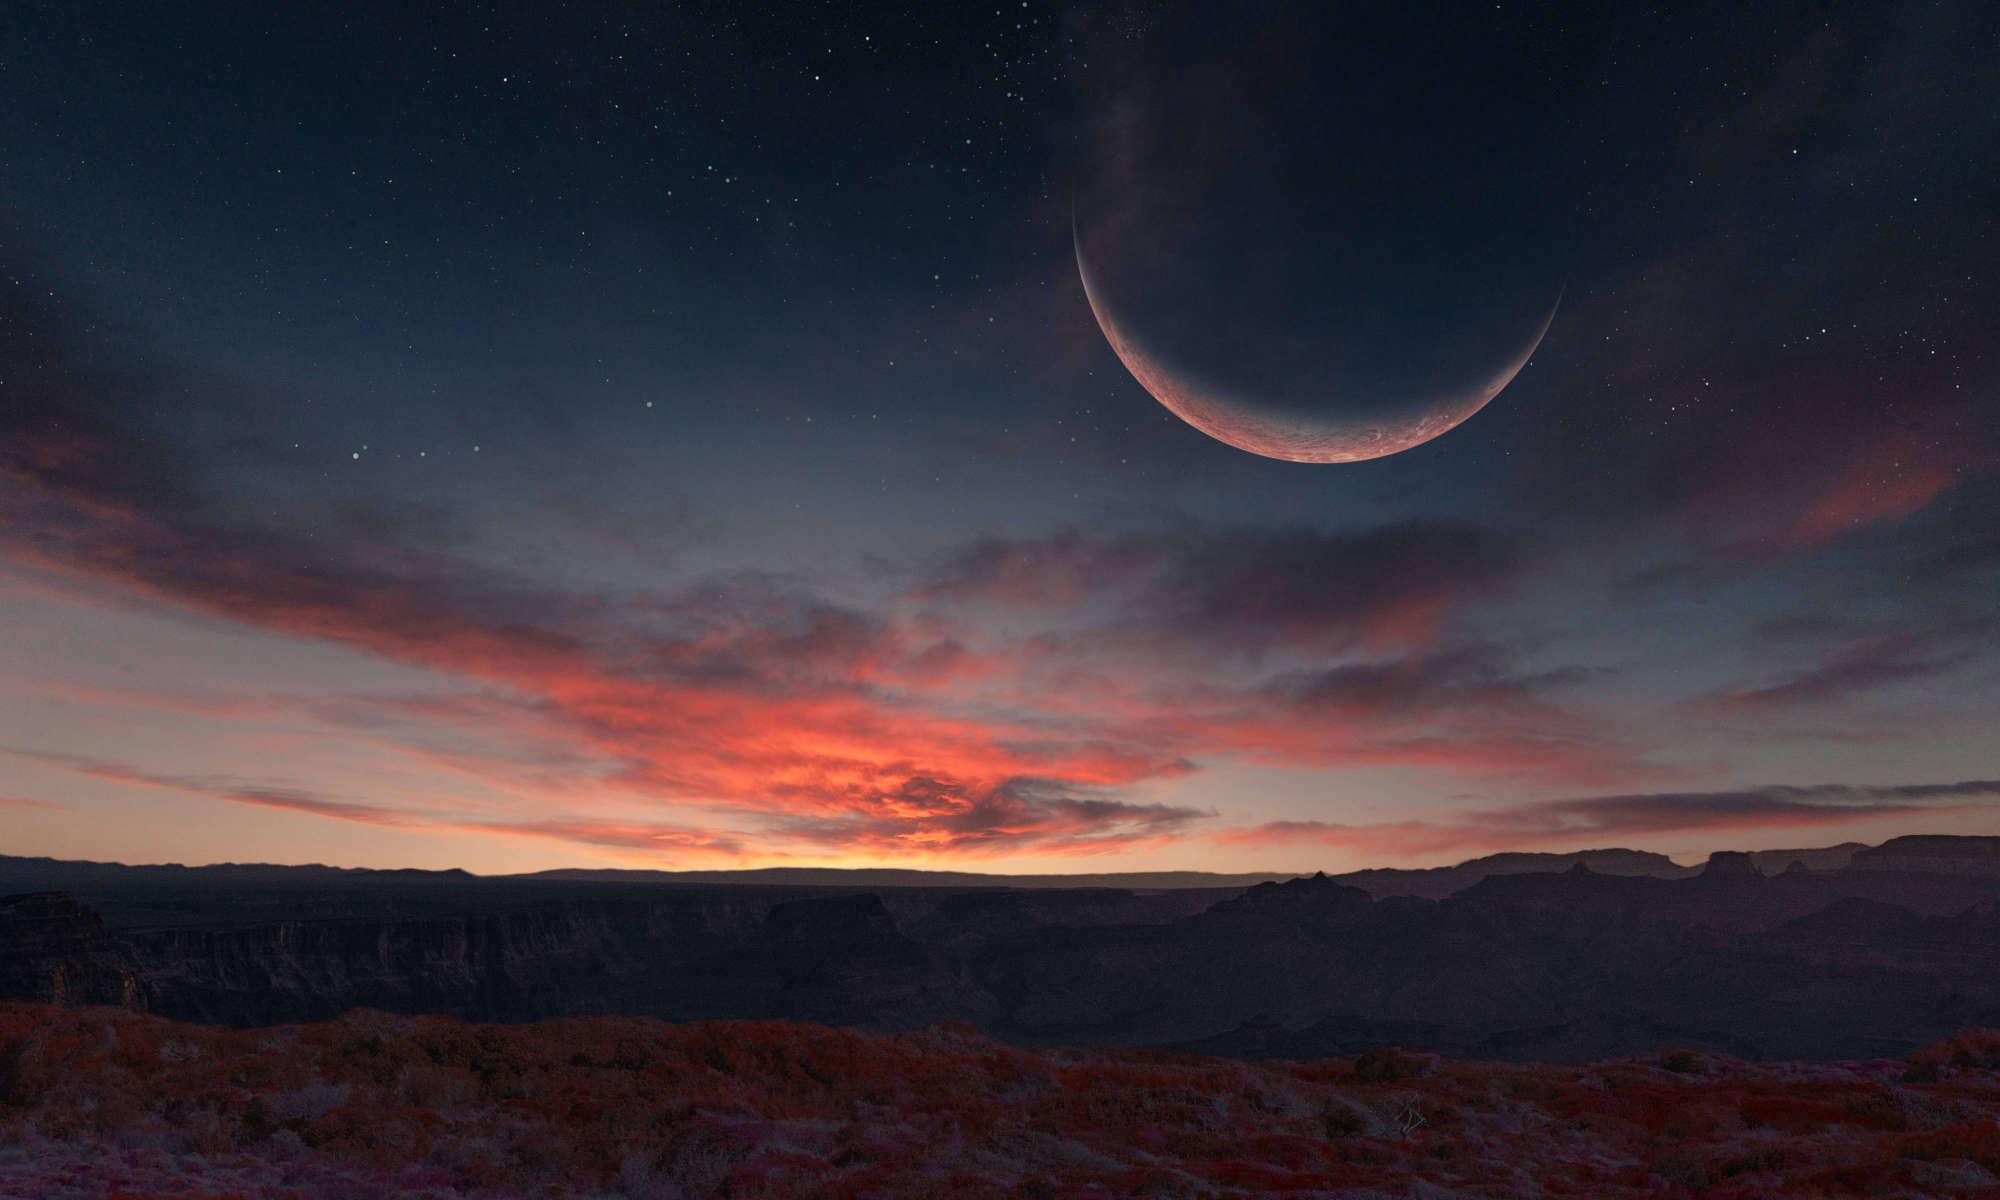 Photo illustration depicting a rocky Earth-like landscape with the orange-pink light of a setting sun reflecting off a large moon likely formed with the limited role of streaming instability.